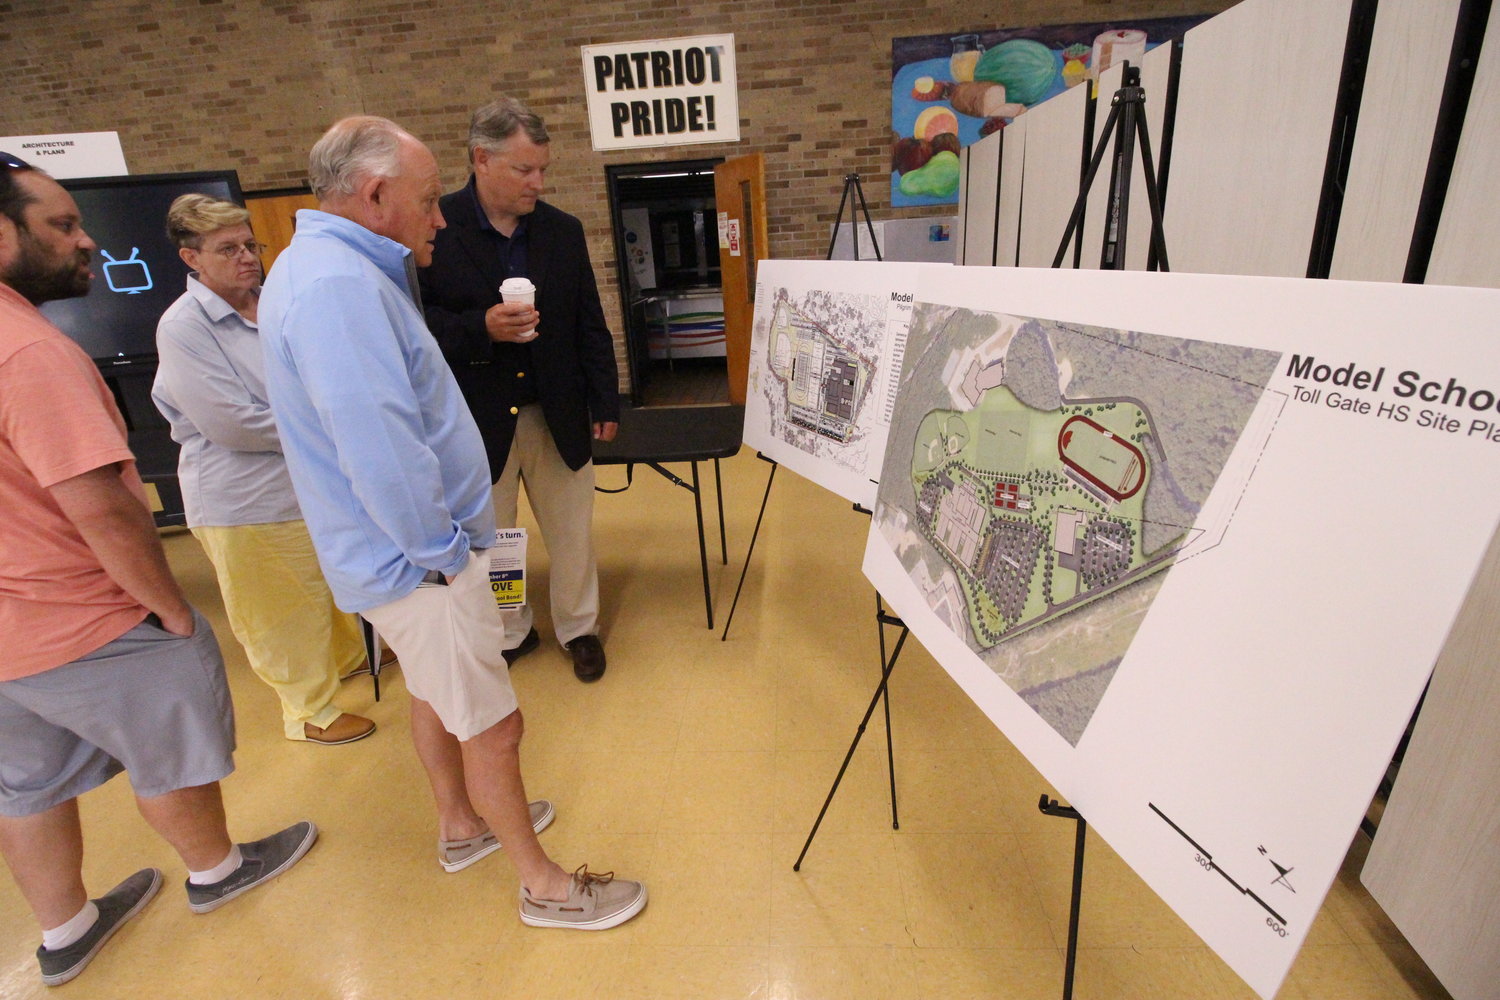 CHECKING OUT THE PLANS: Guy Dufault, who is working with Building Warwick’s Future in support of the $350 million school bond appearing on the November ballot, looks over plans for athletic fields. (Warwick Beacon photos)